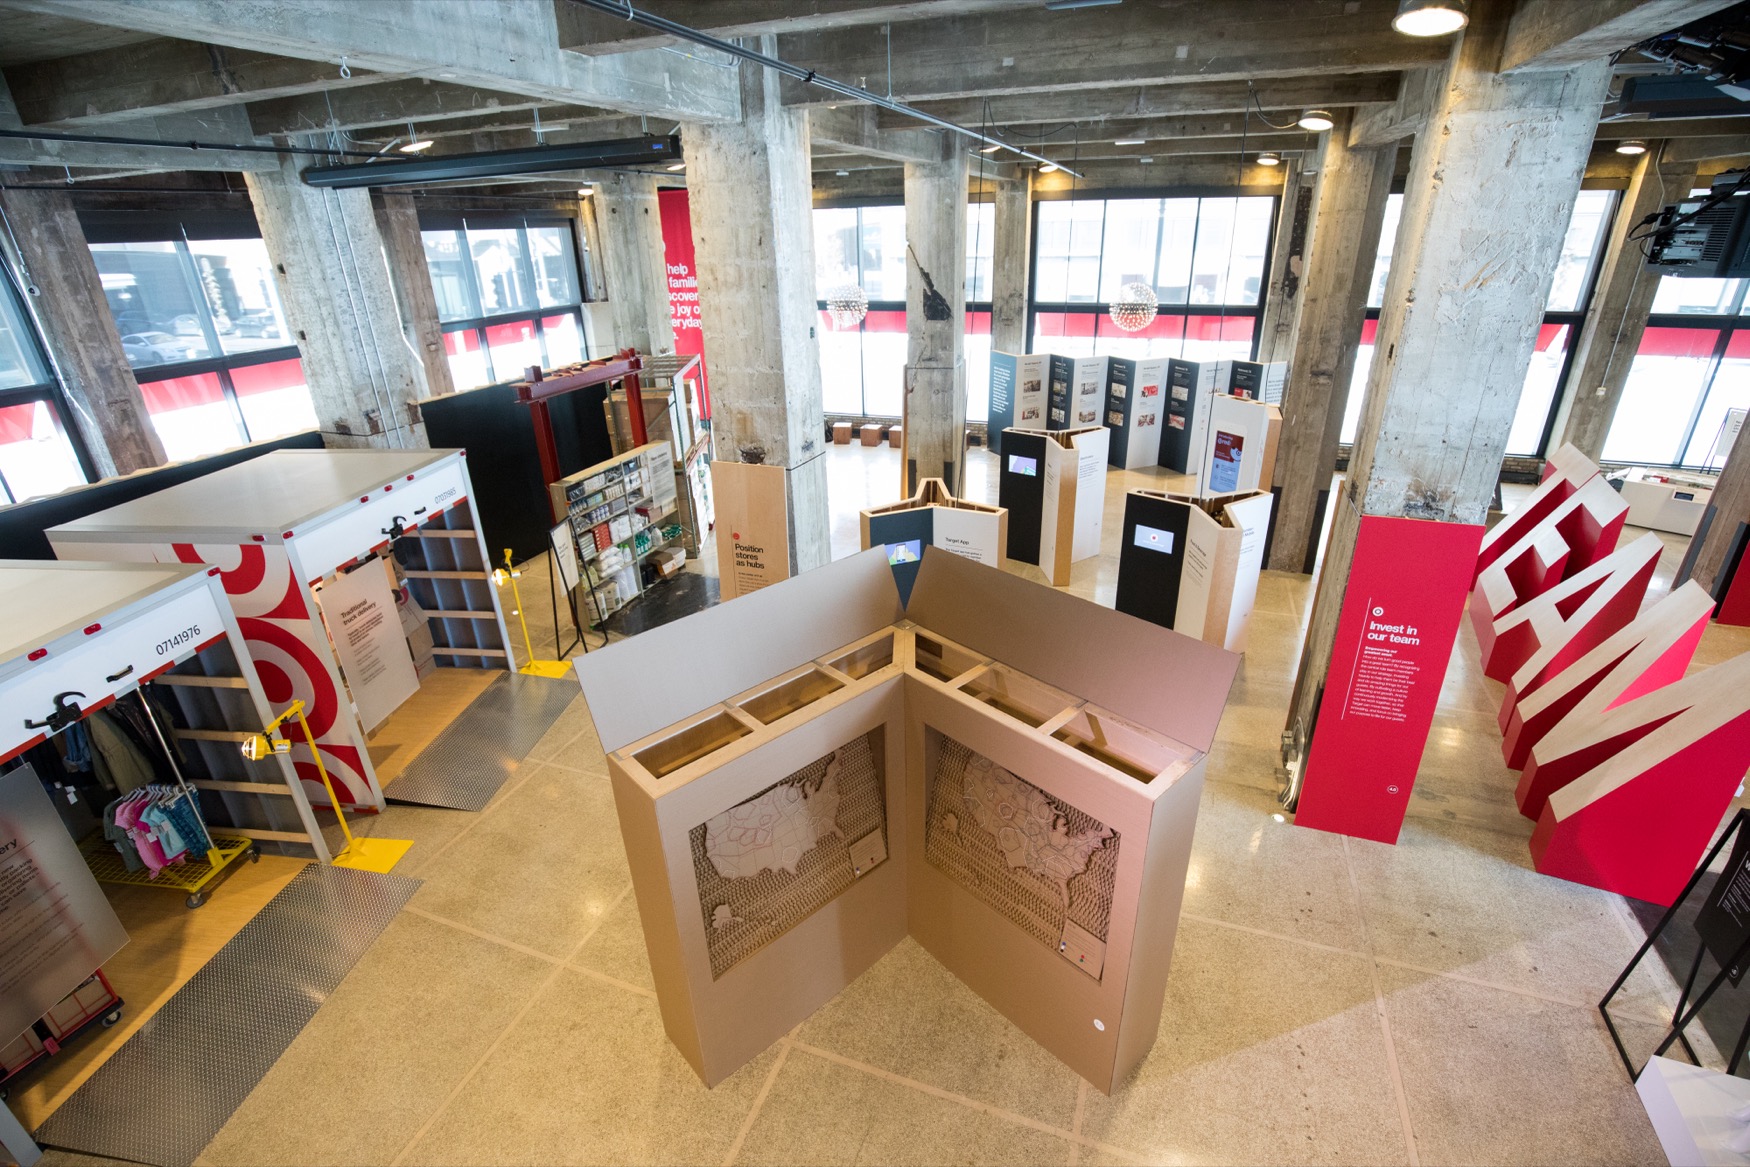 Target marketing displays set up in an industrial building